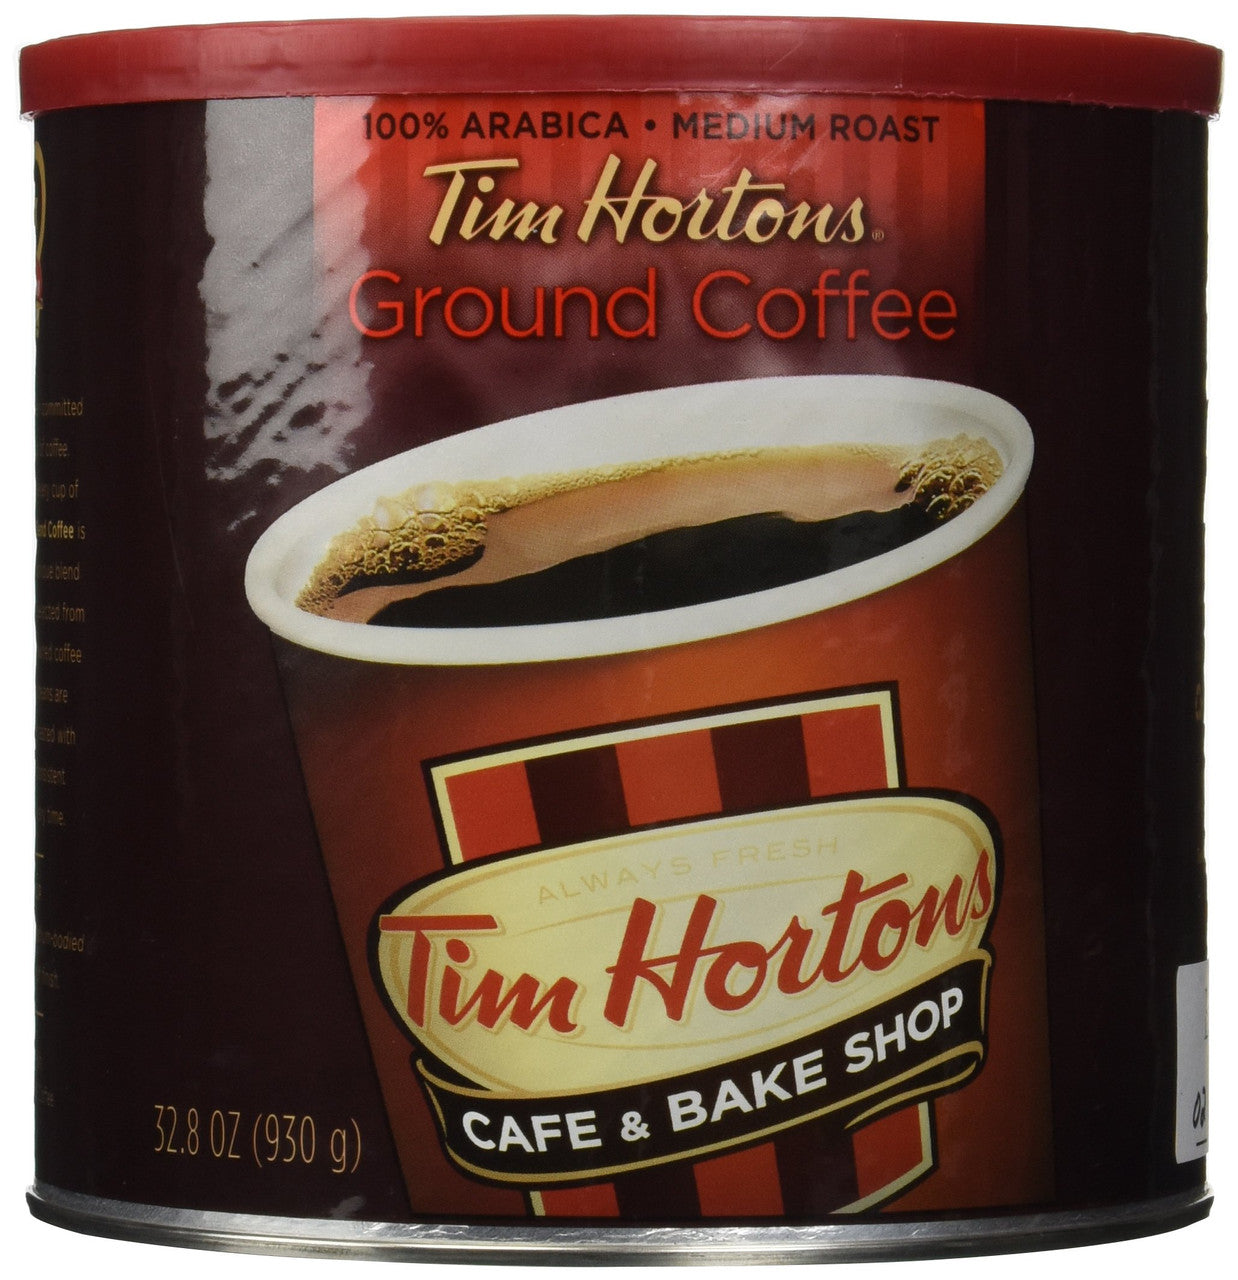 Tim Hortons Ground Coffee , 32.8oz (Pack of 2)Cans,{Imported from Canada}